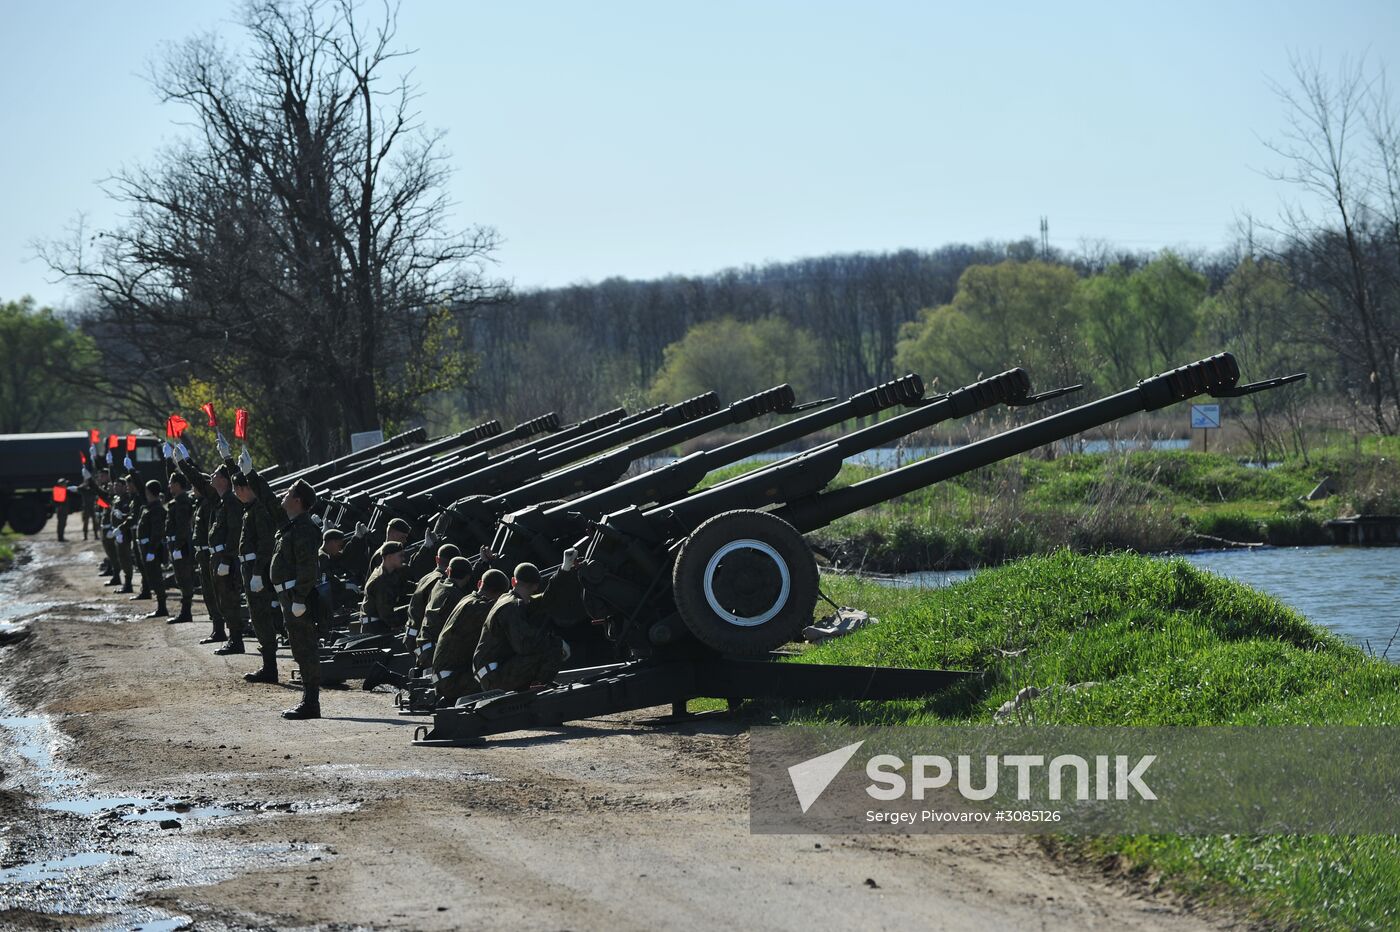 Fireworks division servicemen prepare for Victory Day fireworks display